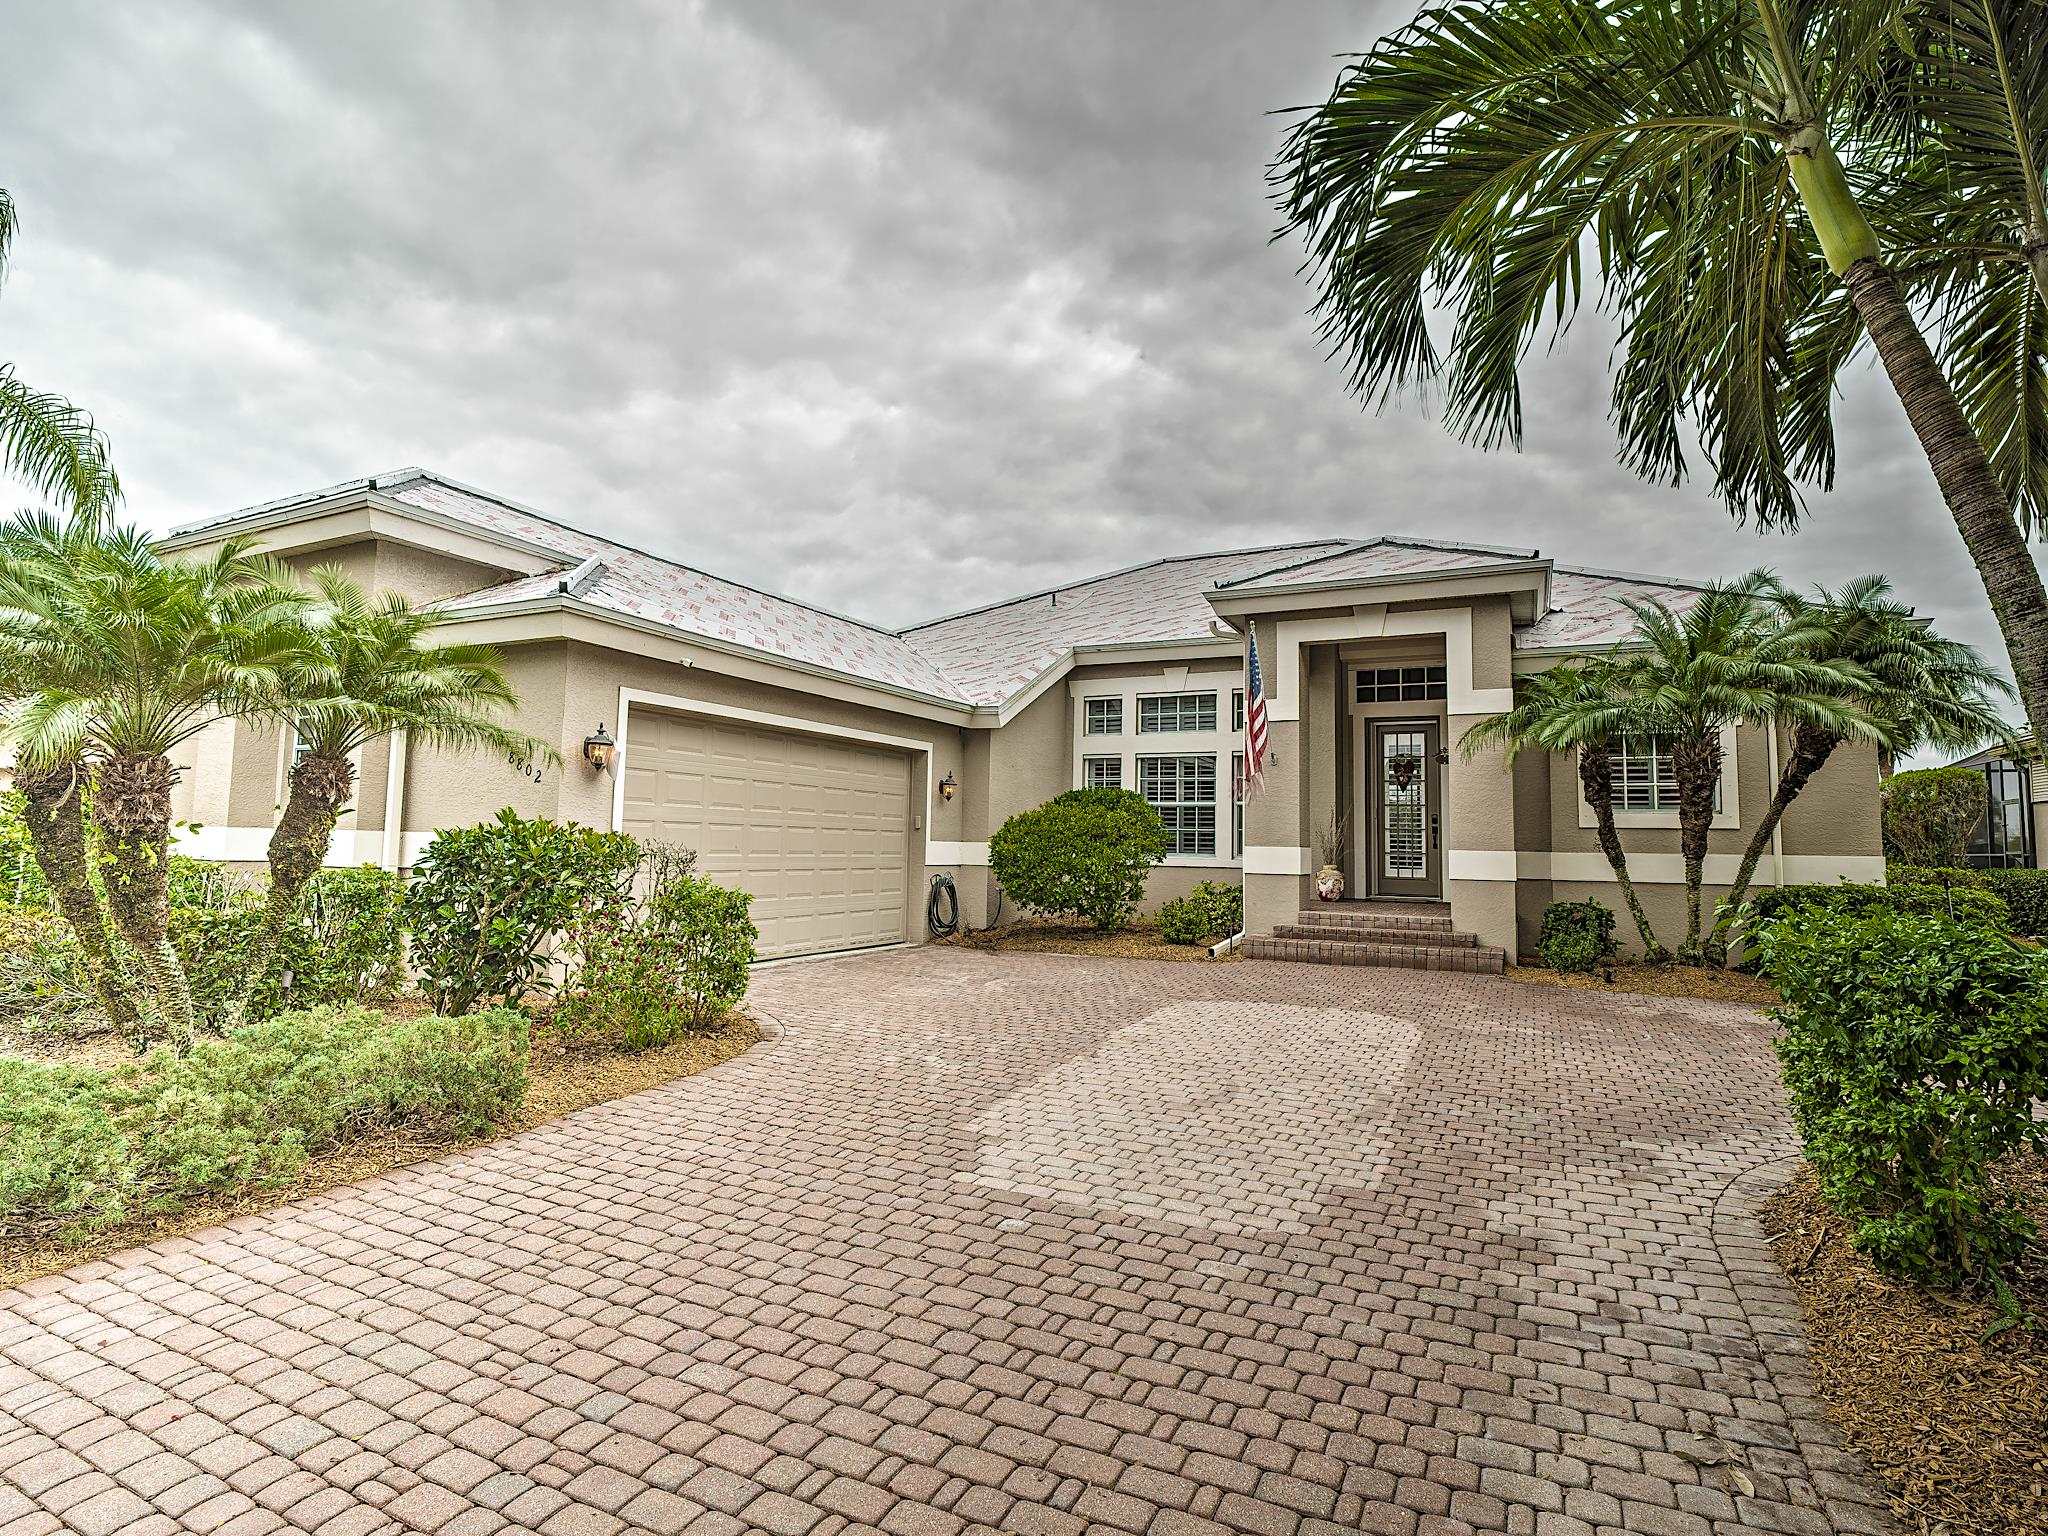 8802 New Castle Dr, Fort Myers, Florida 33908, 3 Bedrooms Bedrooms, ,2 BathroomsBathrooms,Residential,For Sale,New Castle Dr,2240180